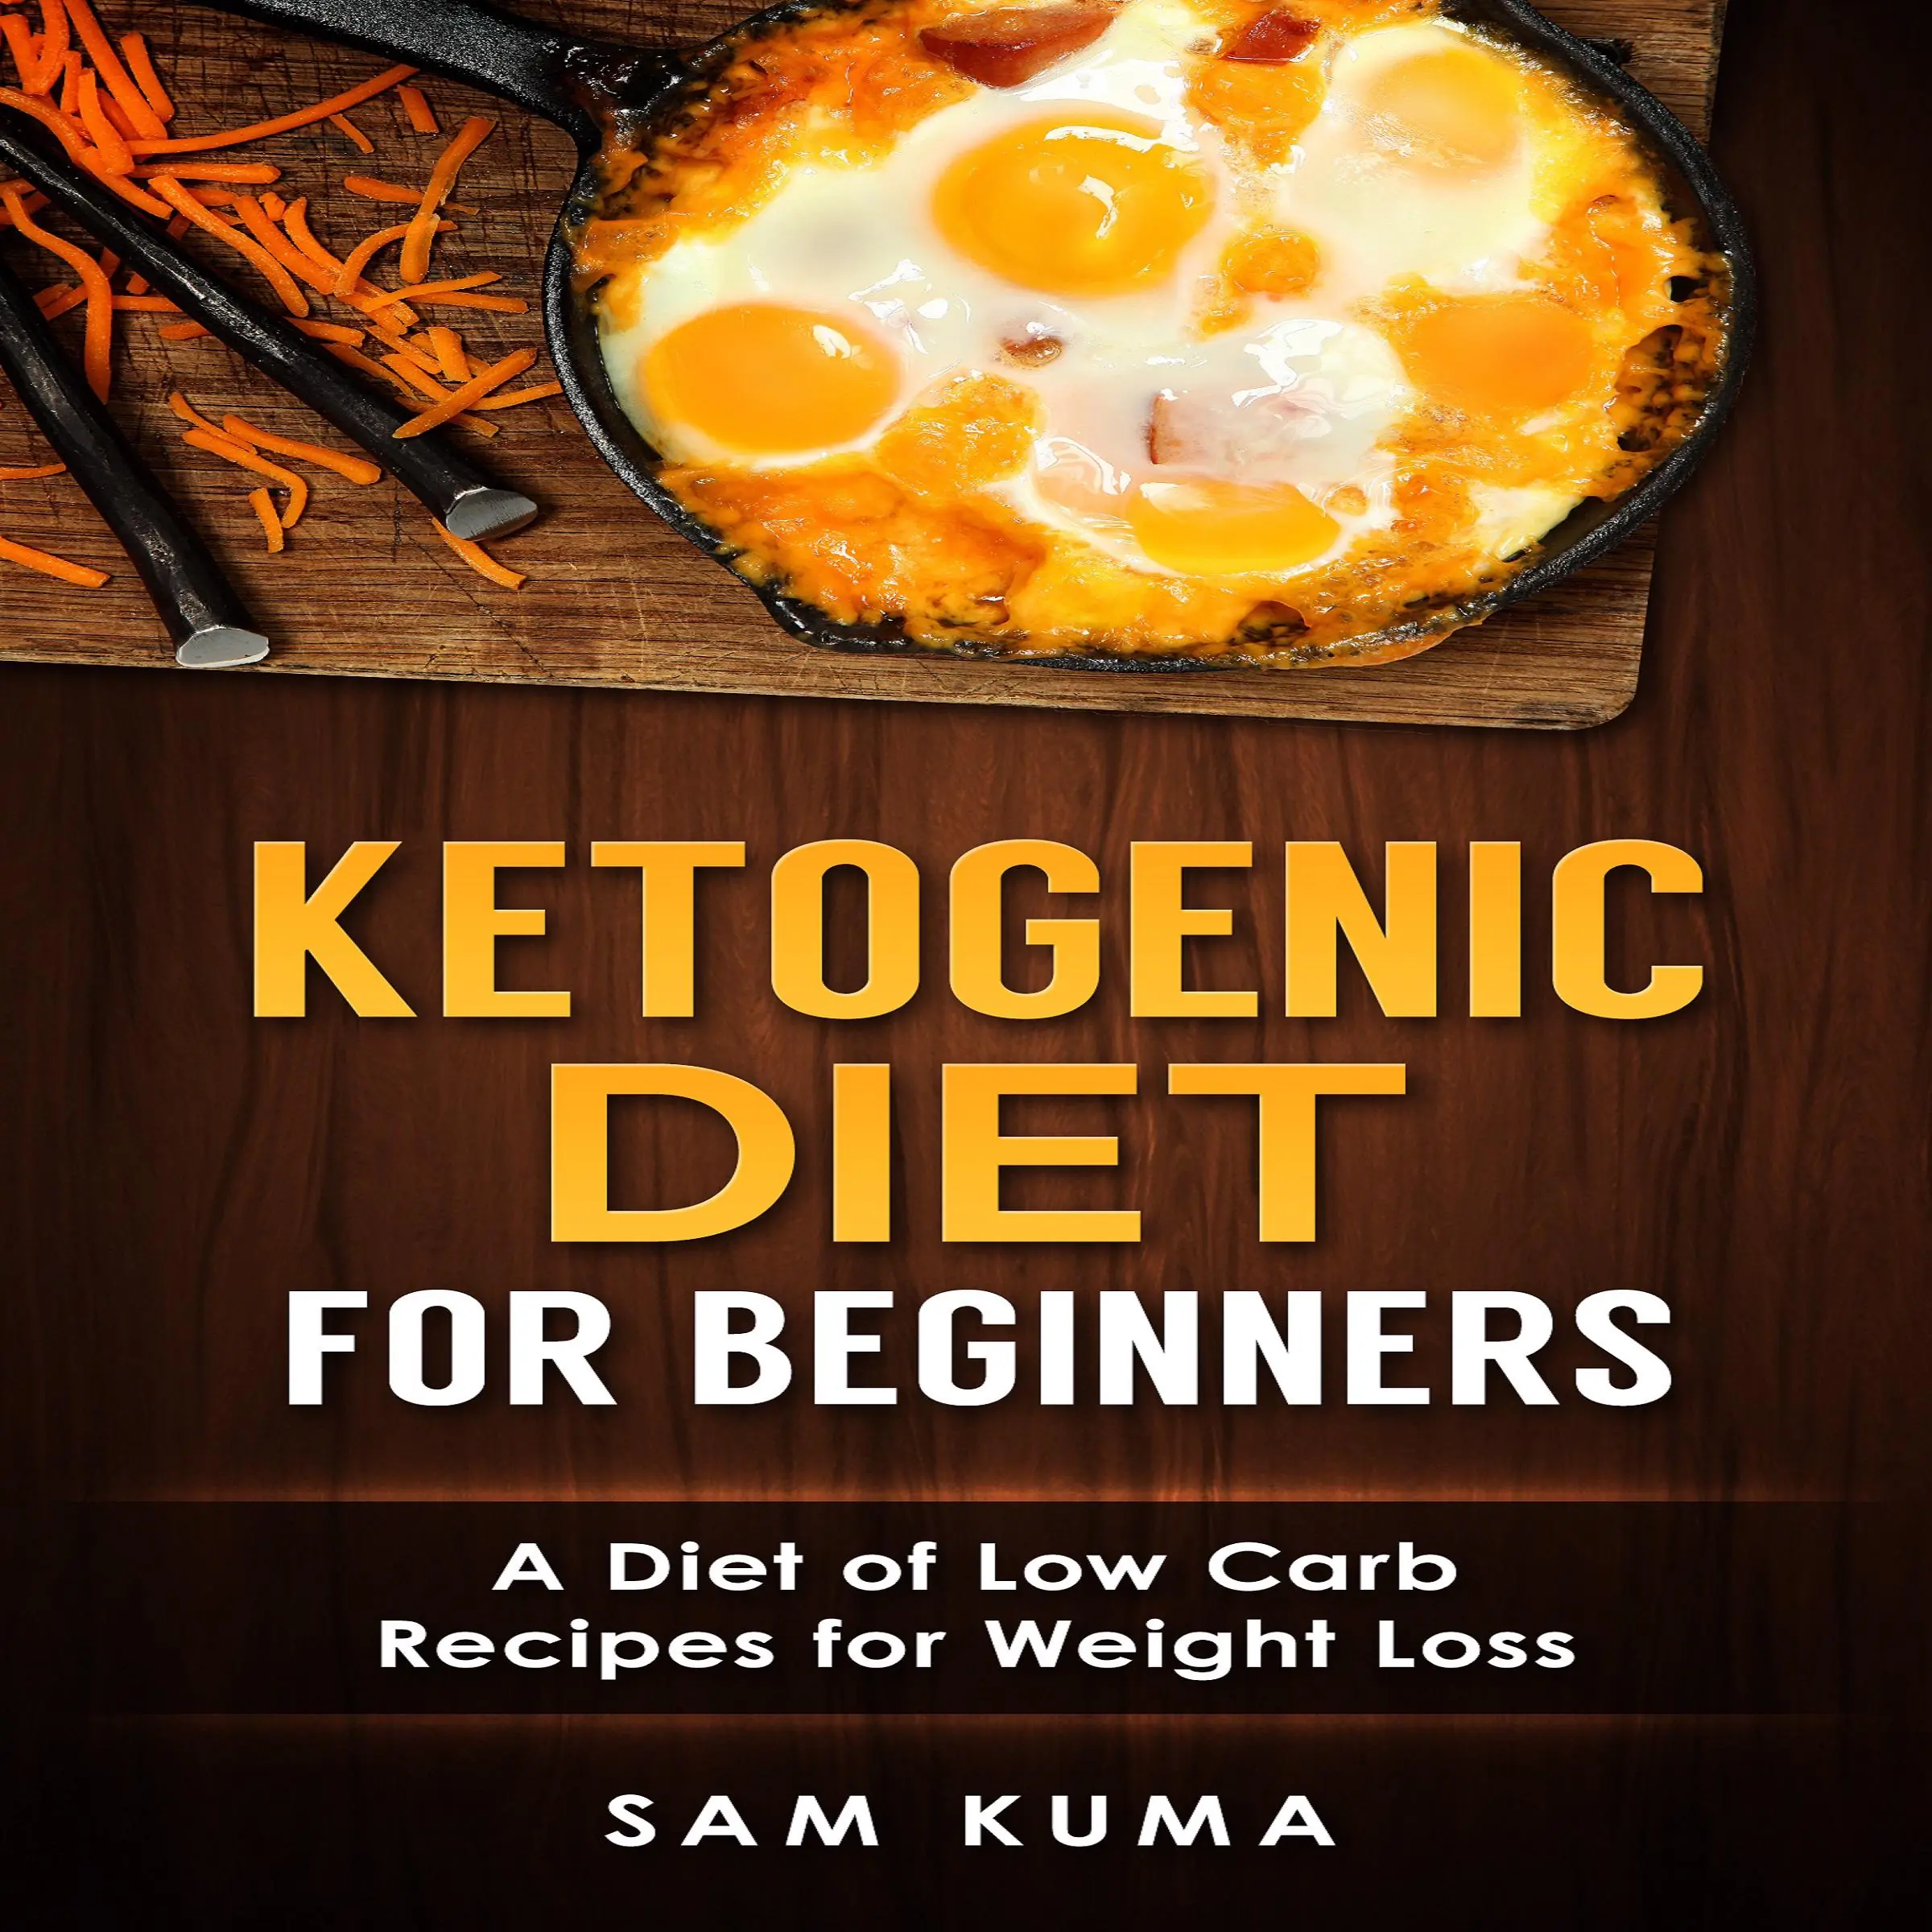 Ketogenic Diet for Beginners: A Diet of Low Carb Recipes for Weight Loss Audiobook by Sam Kuma